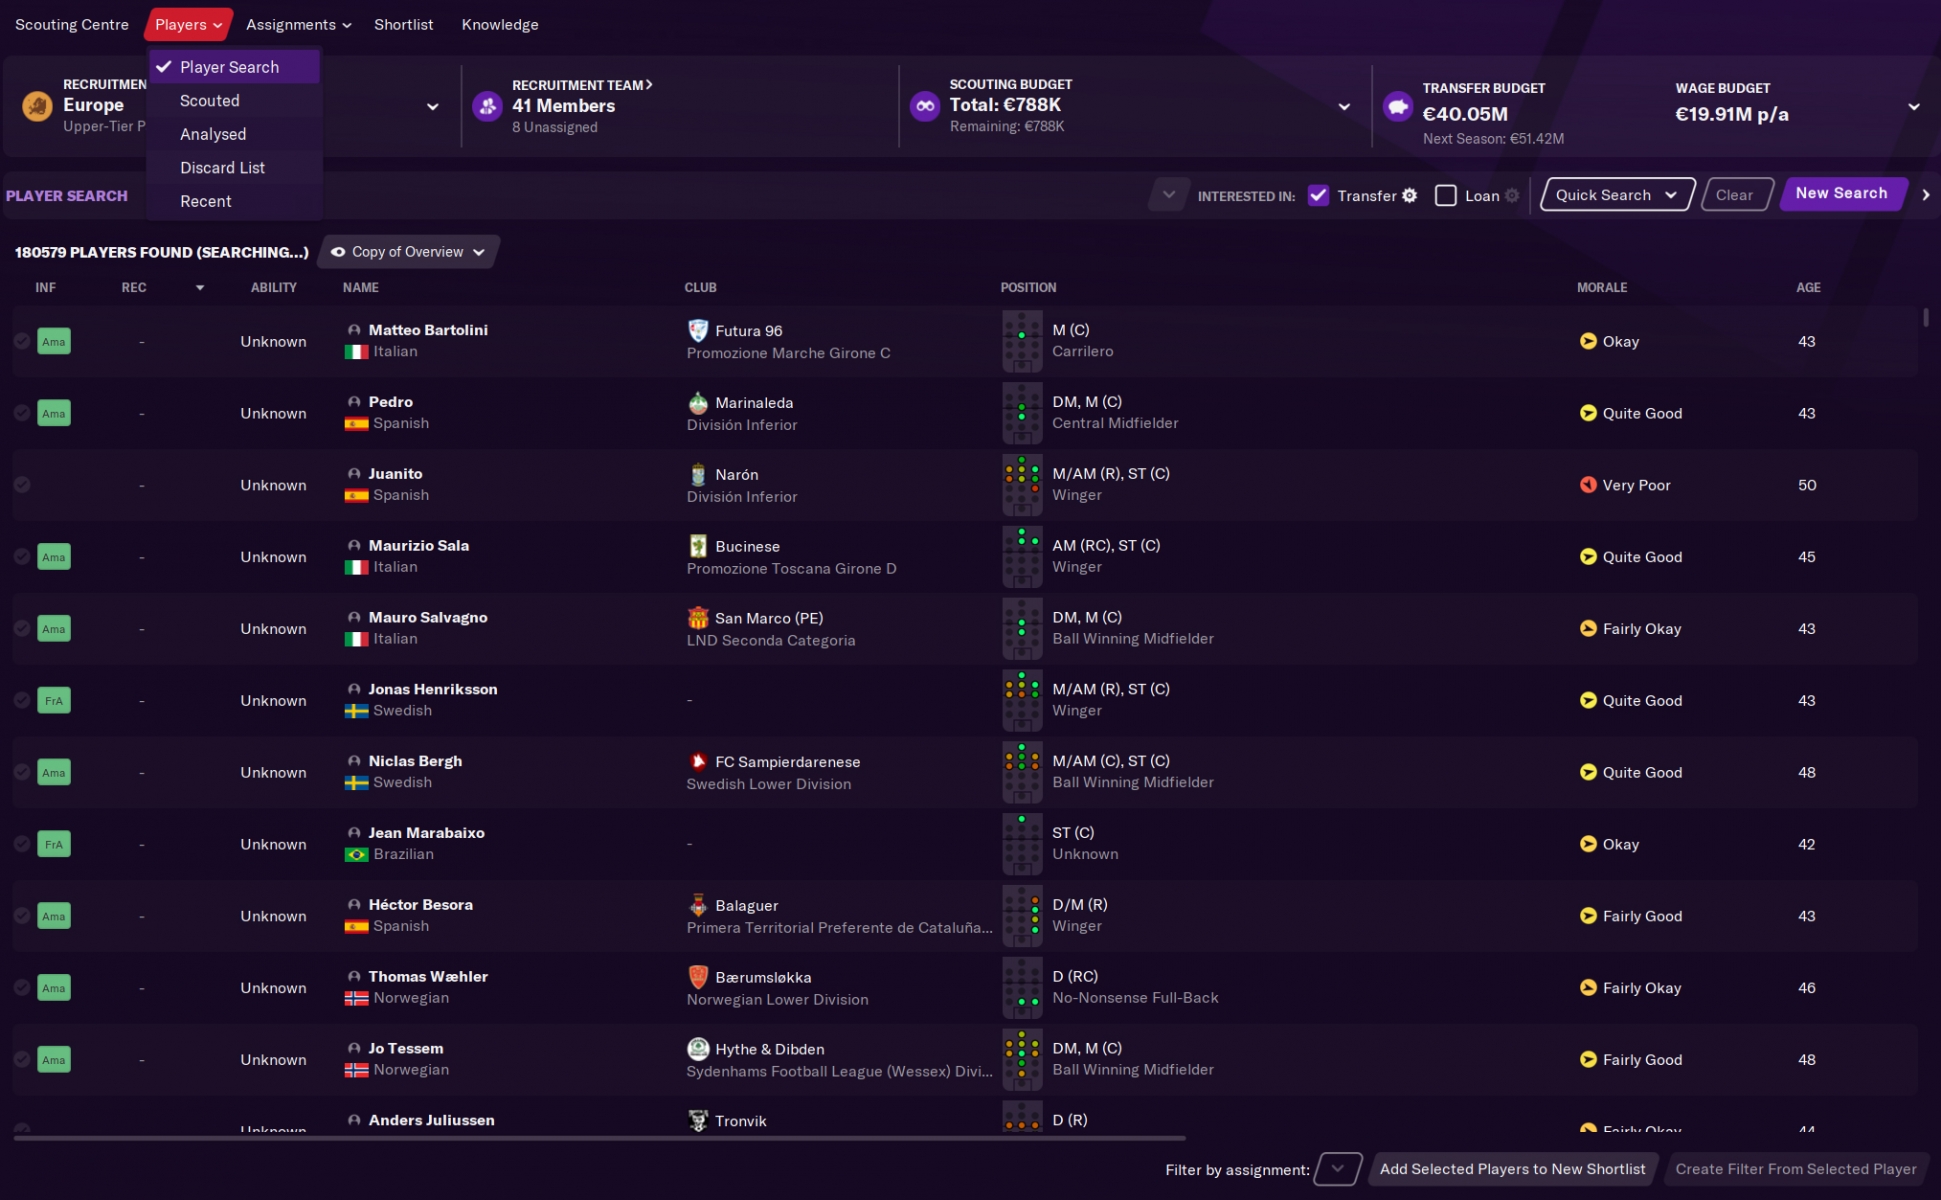 FM24 wonderkids, Best young players in Football Manager 2024